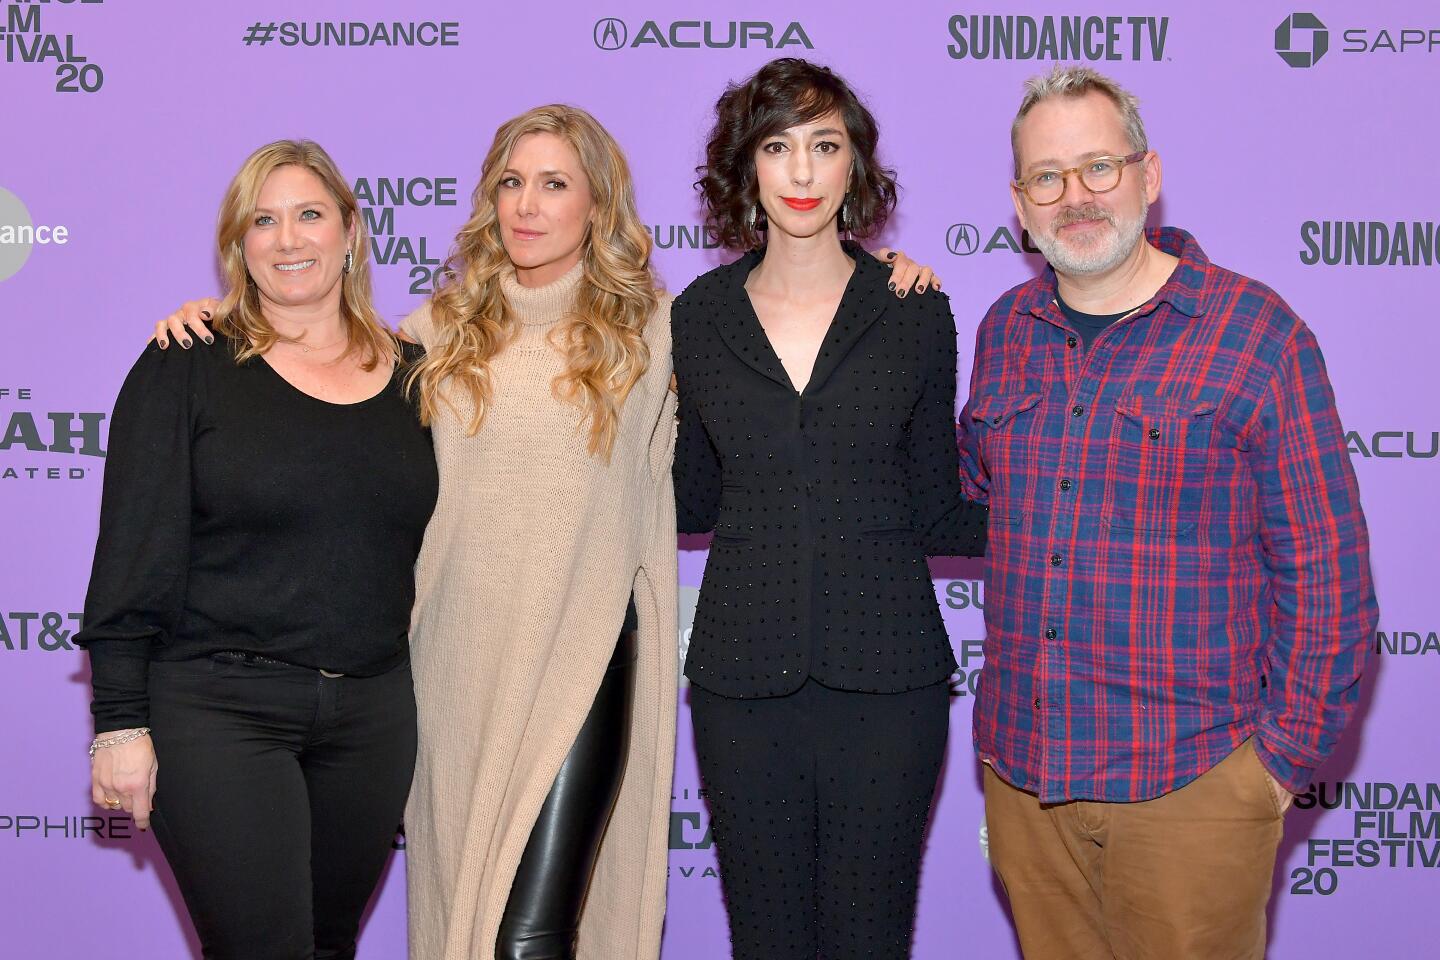 Christine O'Malley, left, Caitrin Rogers, Lana Wilson and Morgan Neville attend the 2020 Sundance Film Festival's opening-night premiere of documentary "Miss Americana."